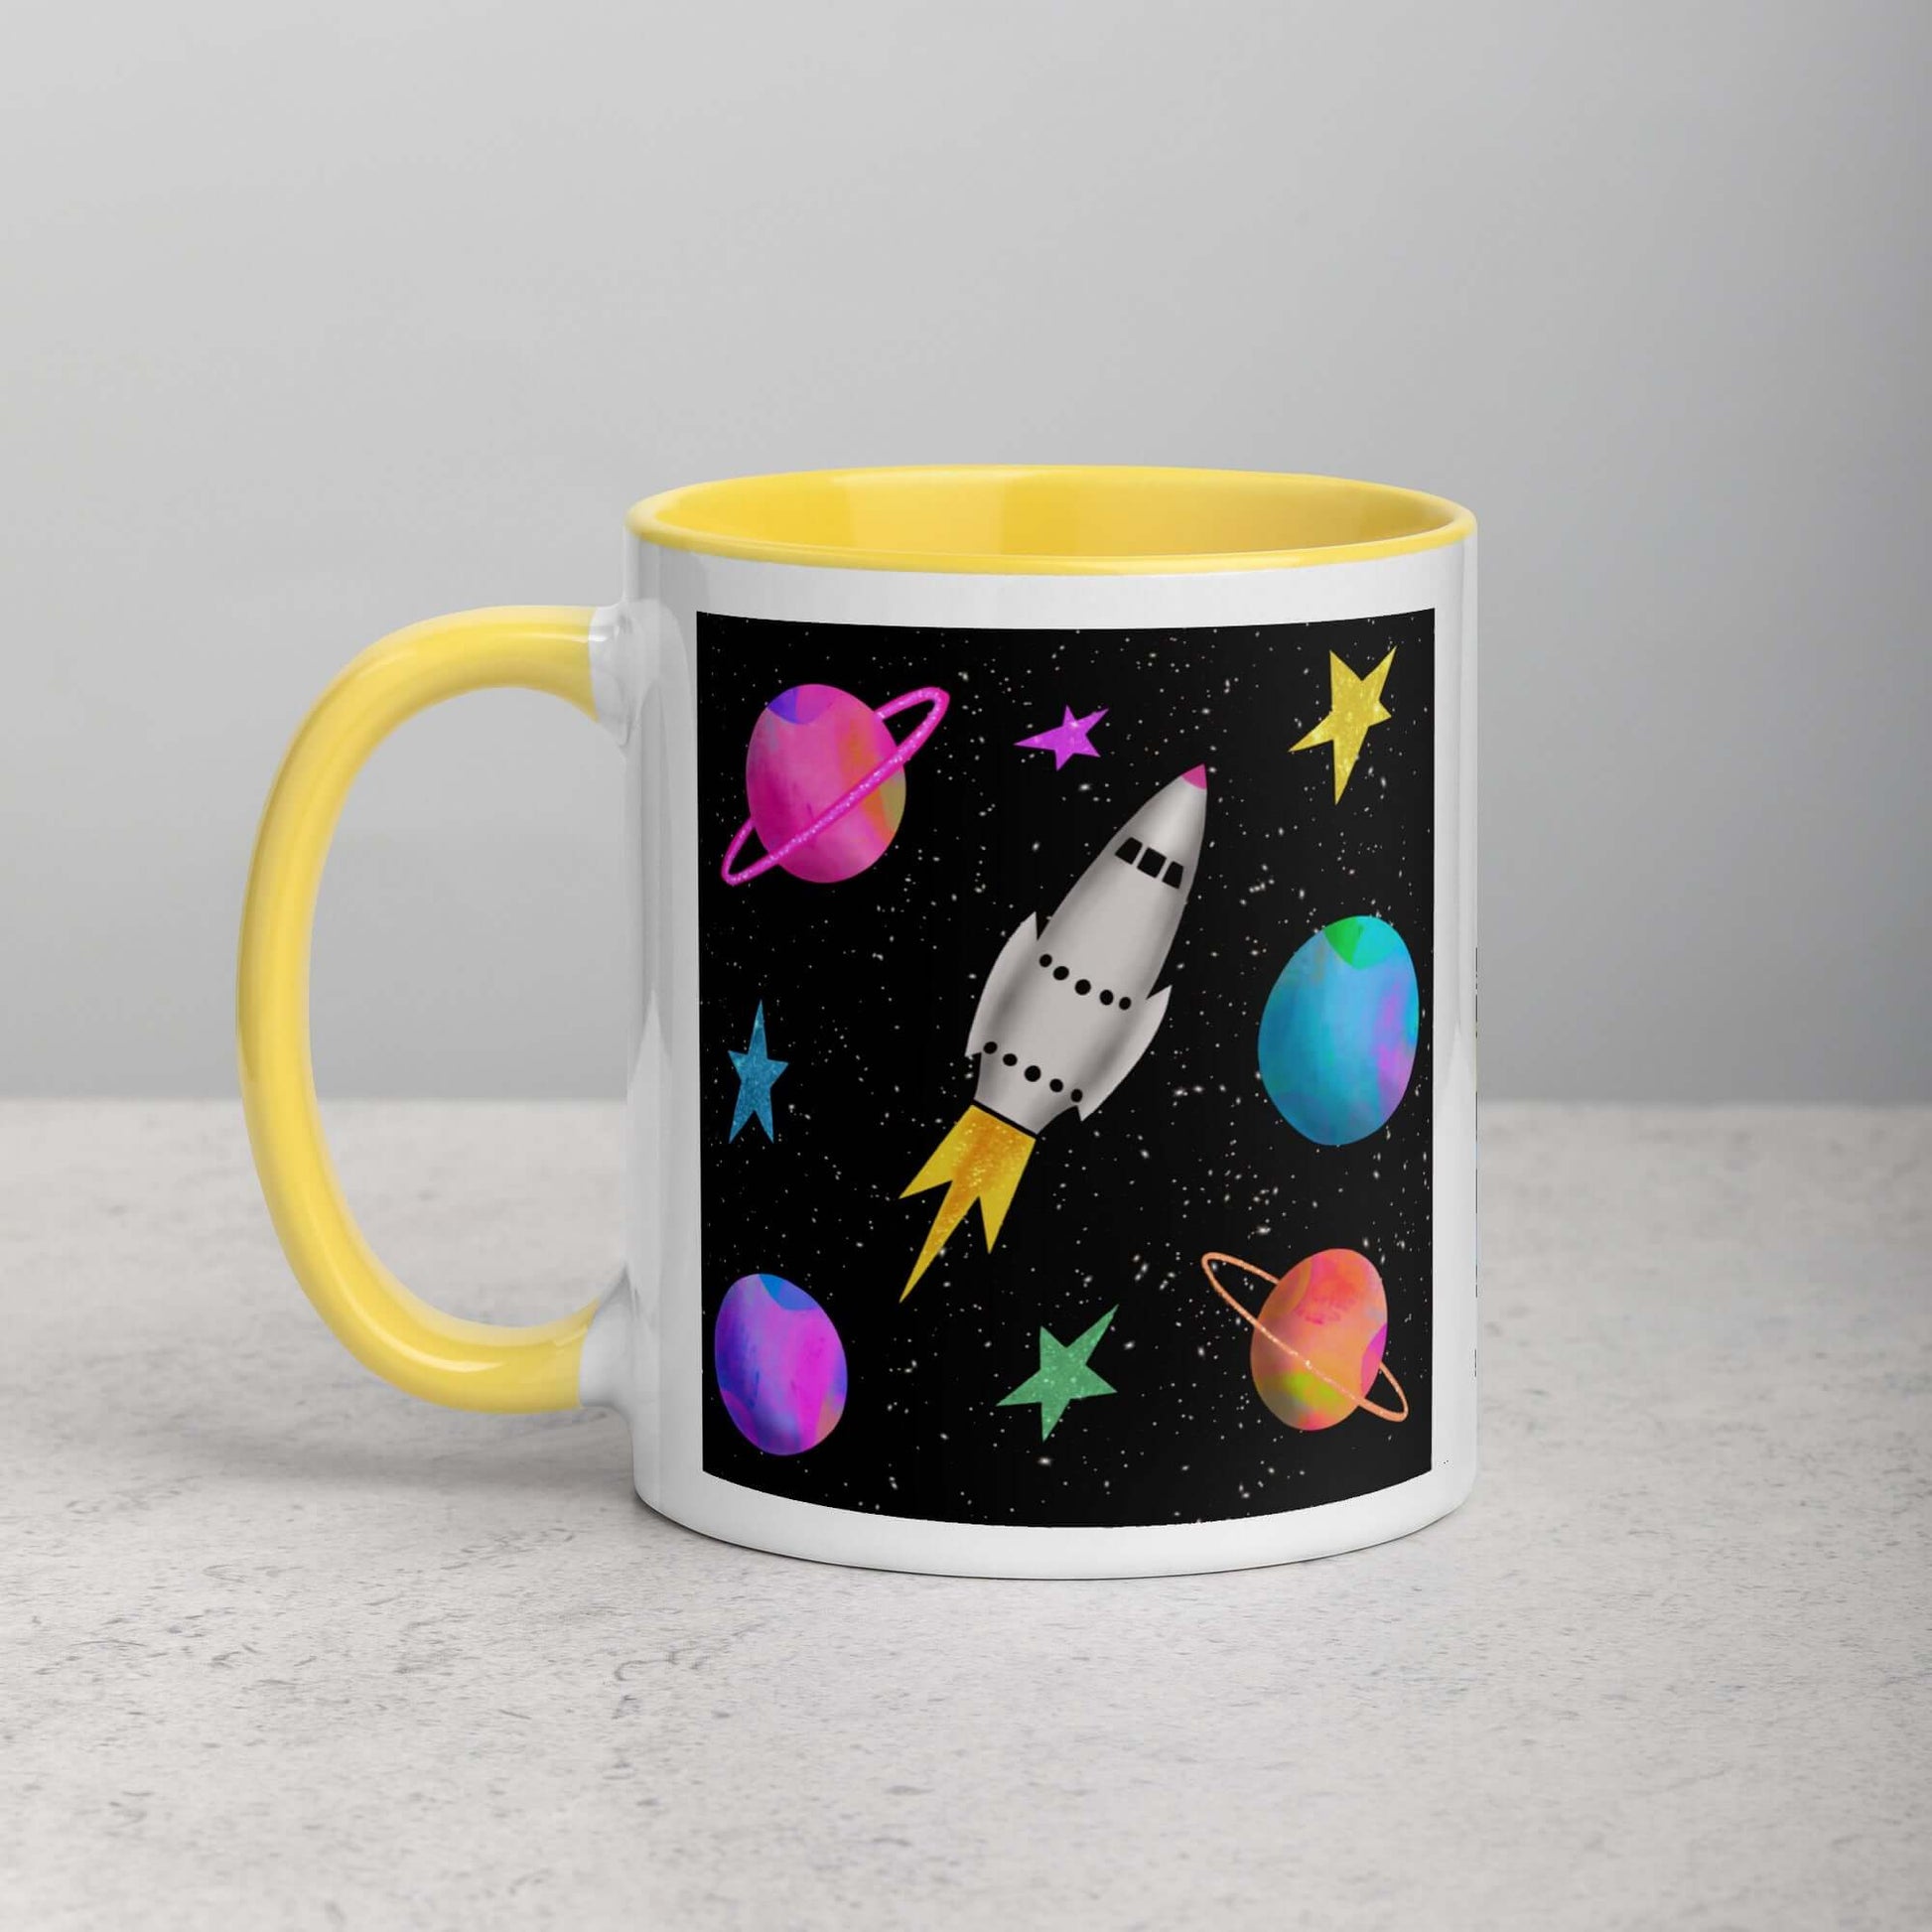 Whimsical Space Rocket with Colorful Planets and Stars on Black Background “Space Rockets” Mug with Bright Yellow Color Inside Left Handed Front View